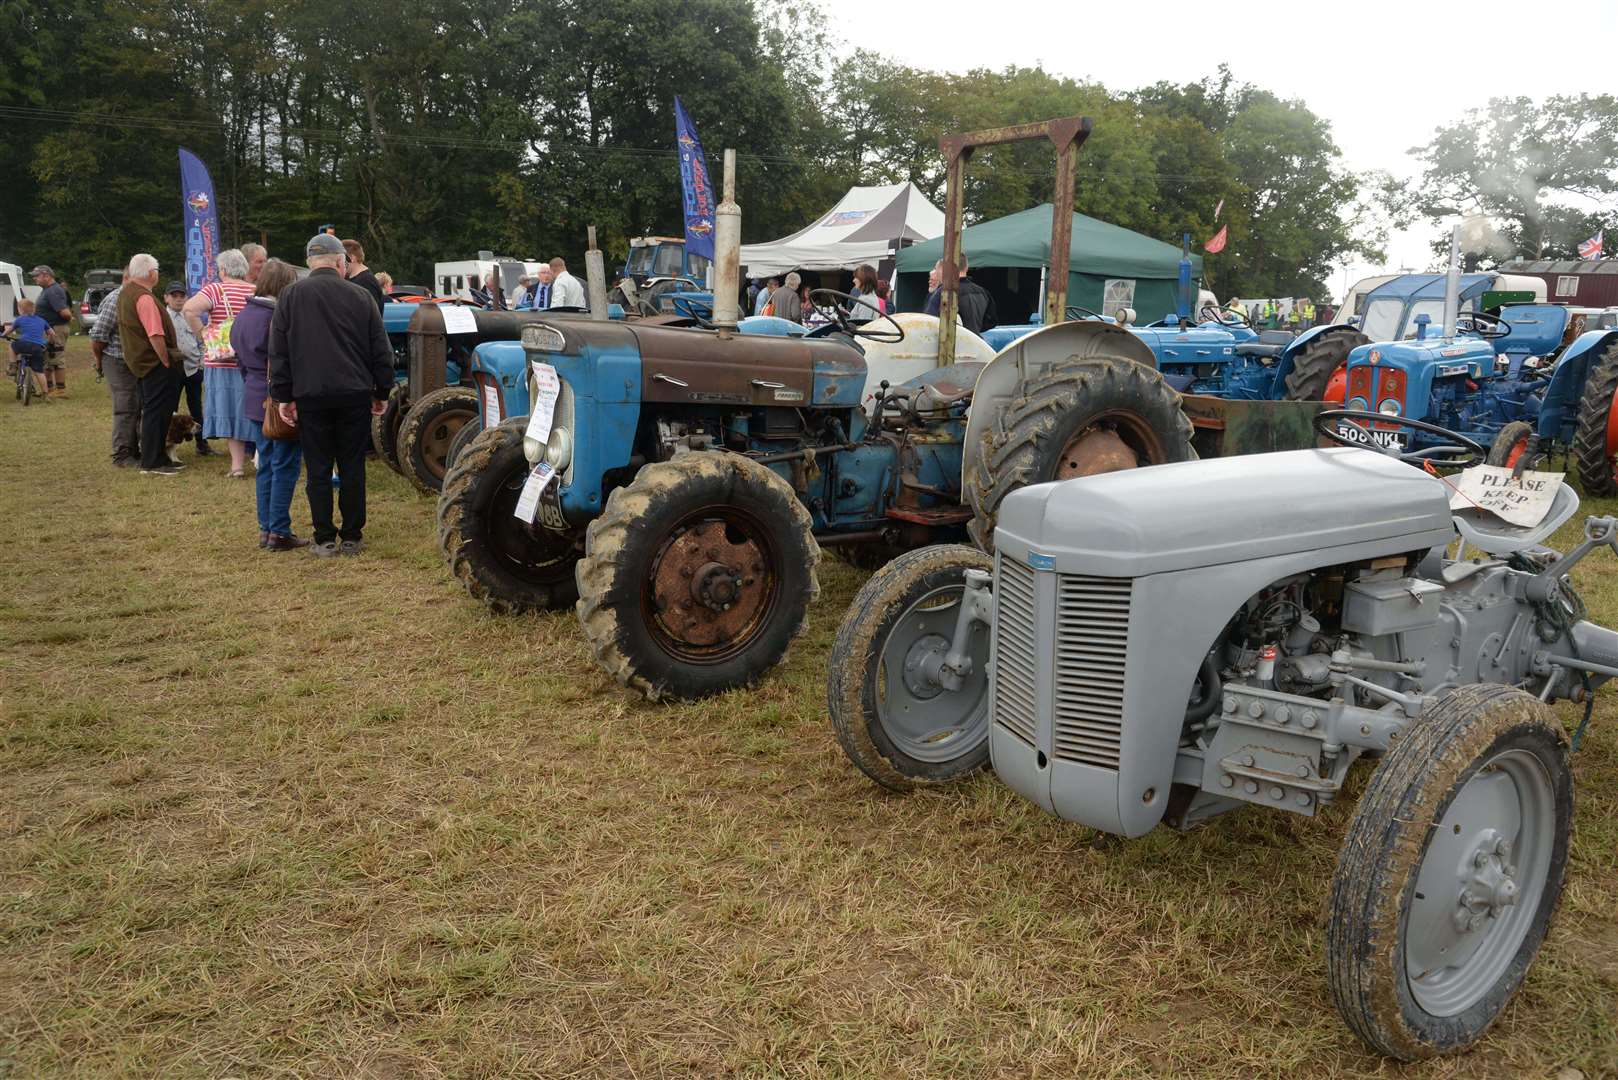 Vintage and classic tractors at the Biddenden Tractorfest. Picture: Chris Davey.